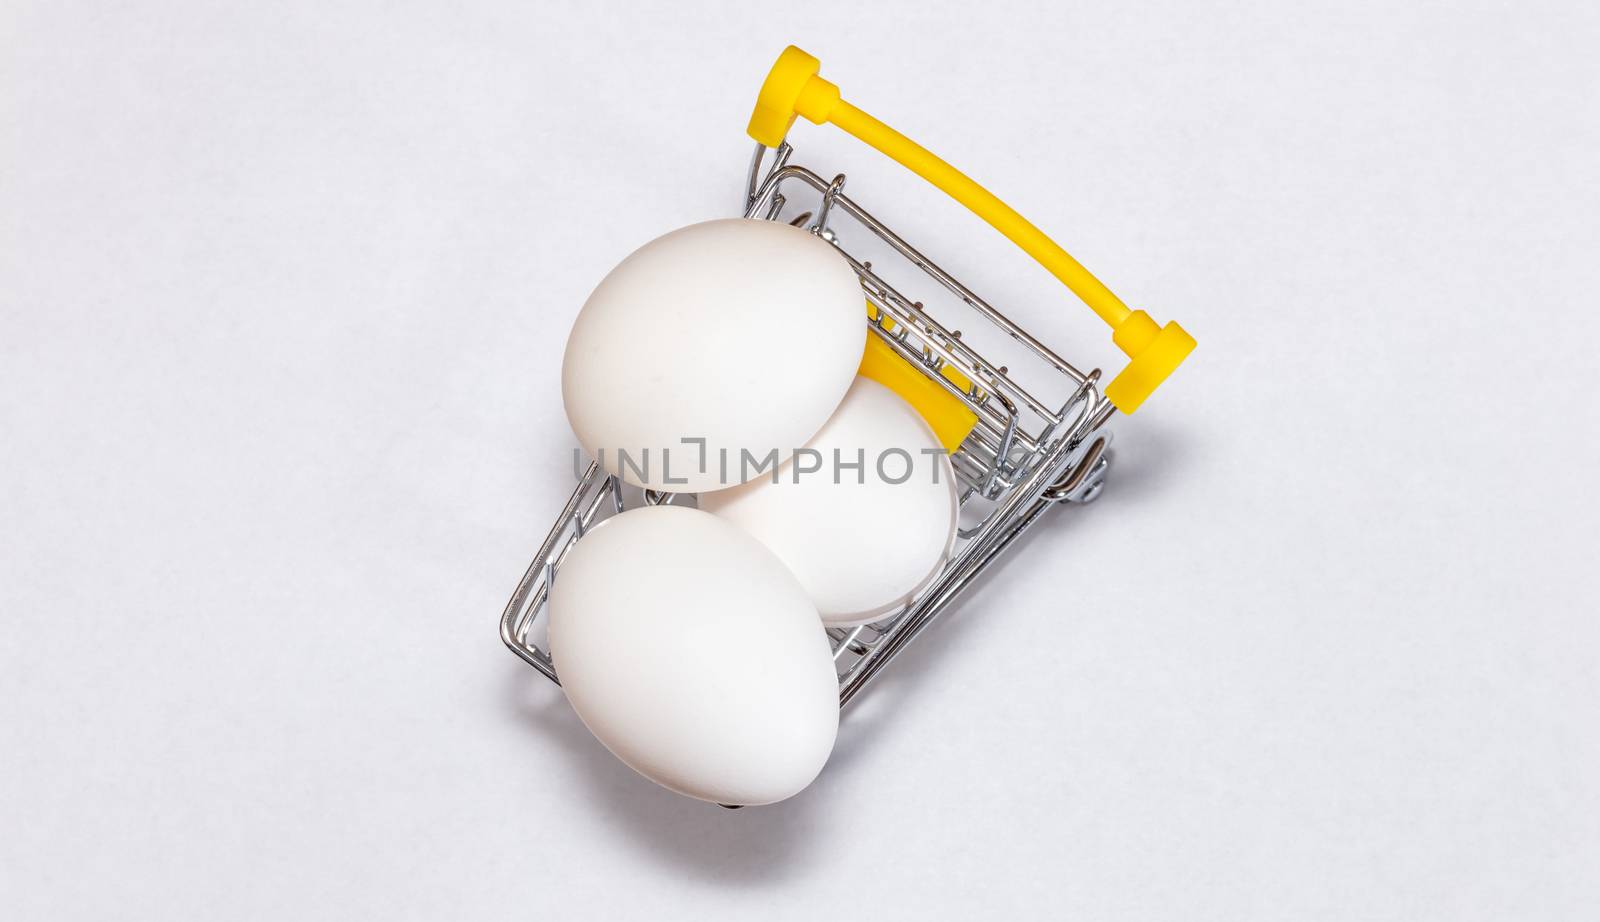 Fresh eggs in a shopping cart. Top view. Shopping, purchasing, and food delivery concept. White background. Close up shot. Isolated. Copy space.